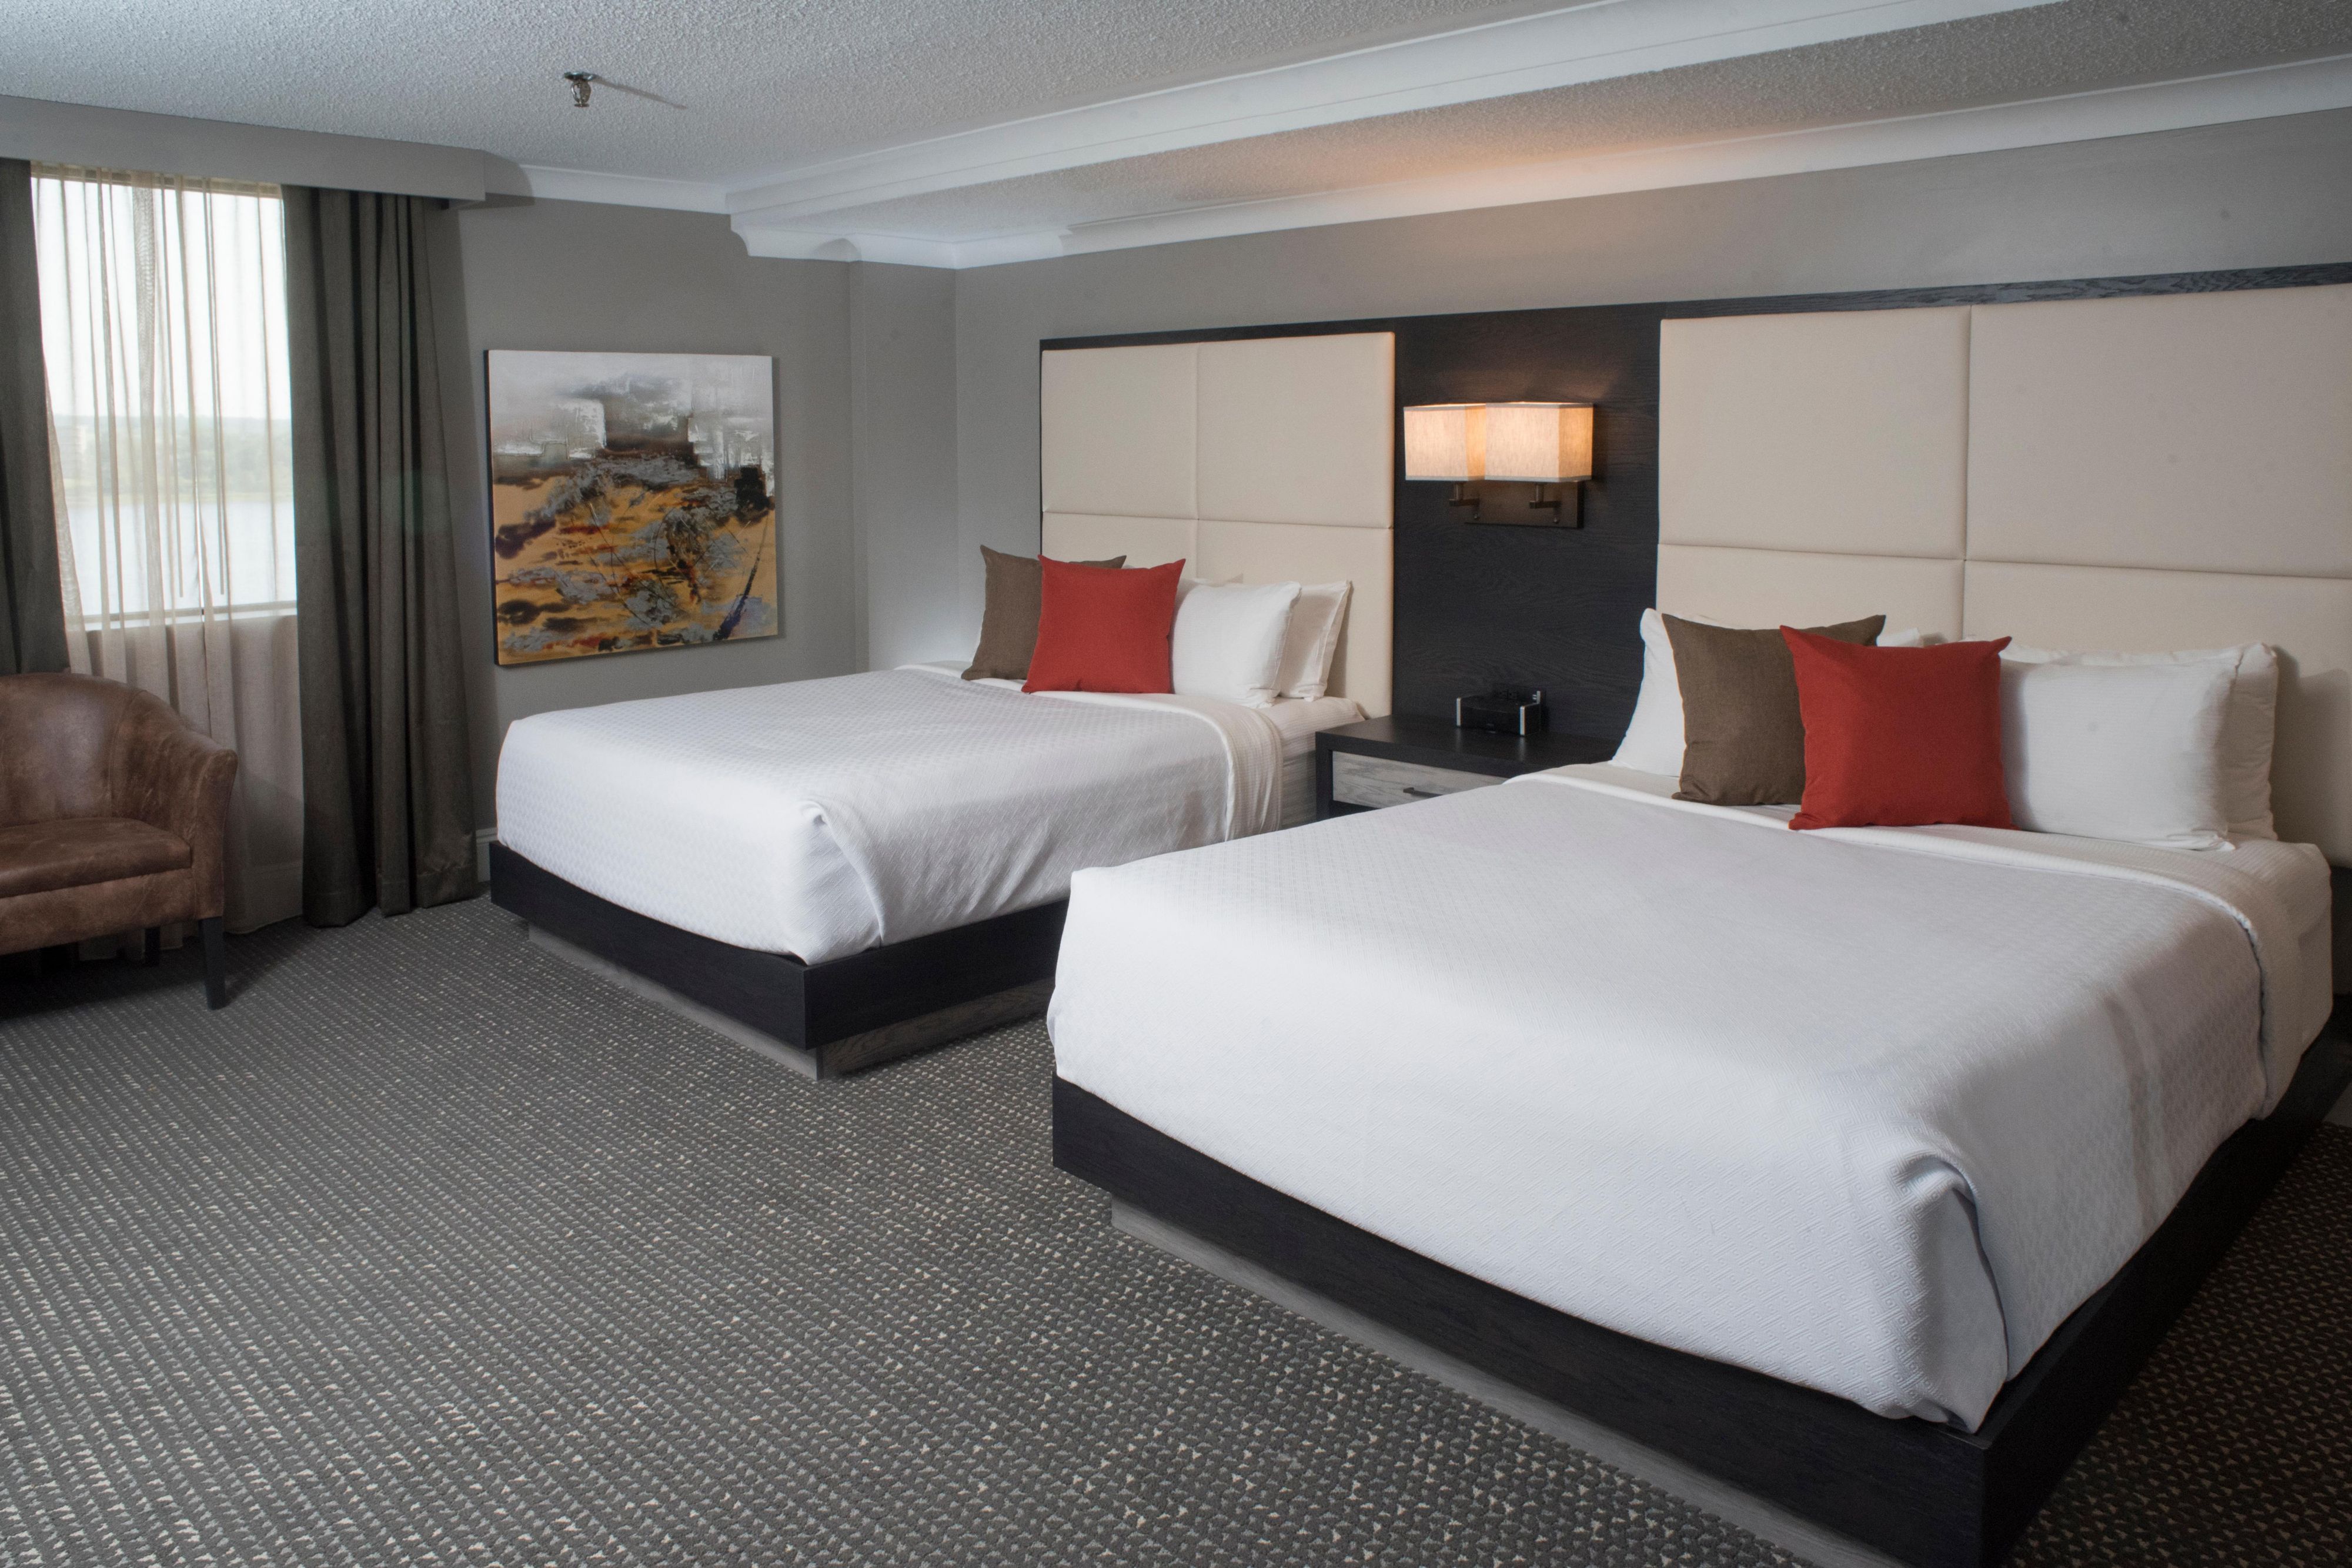 Relax in our clean, fresh, spacious double bed guest rooms